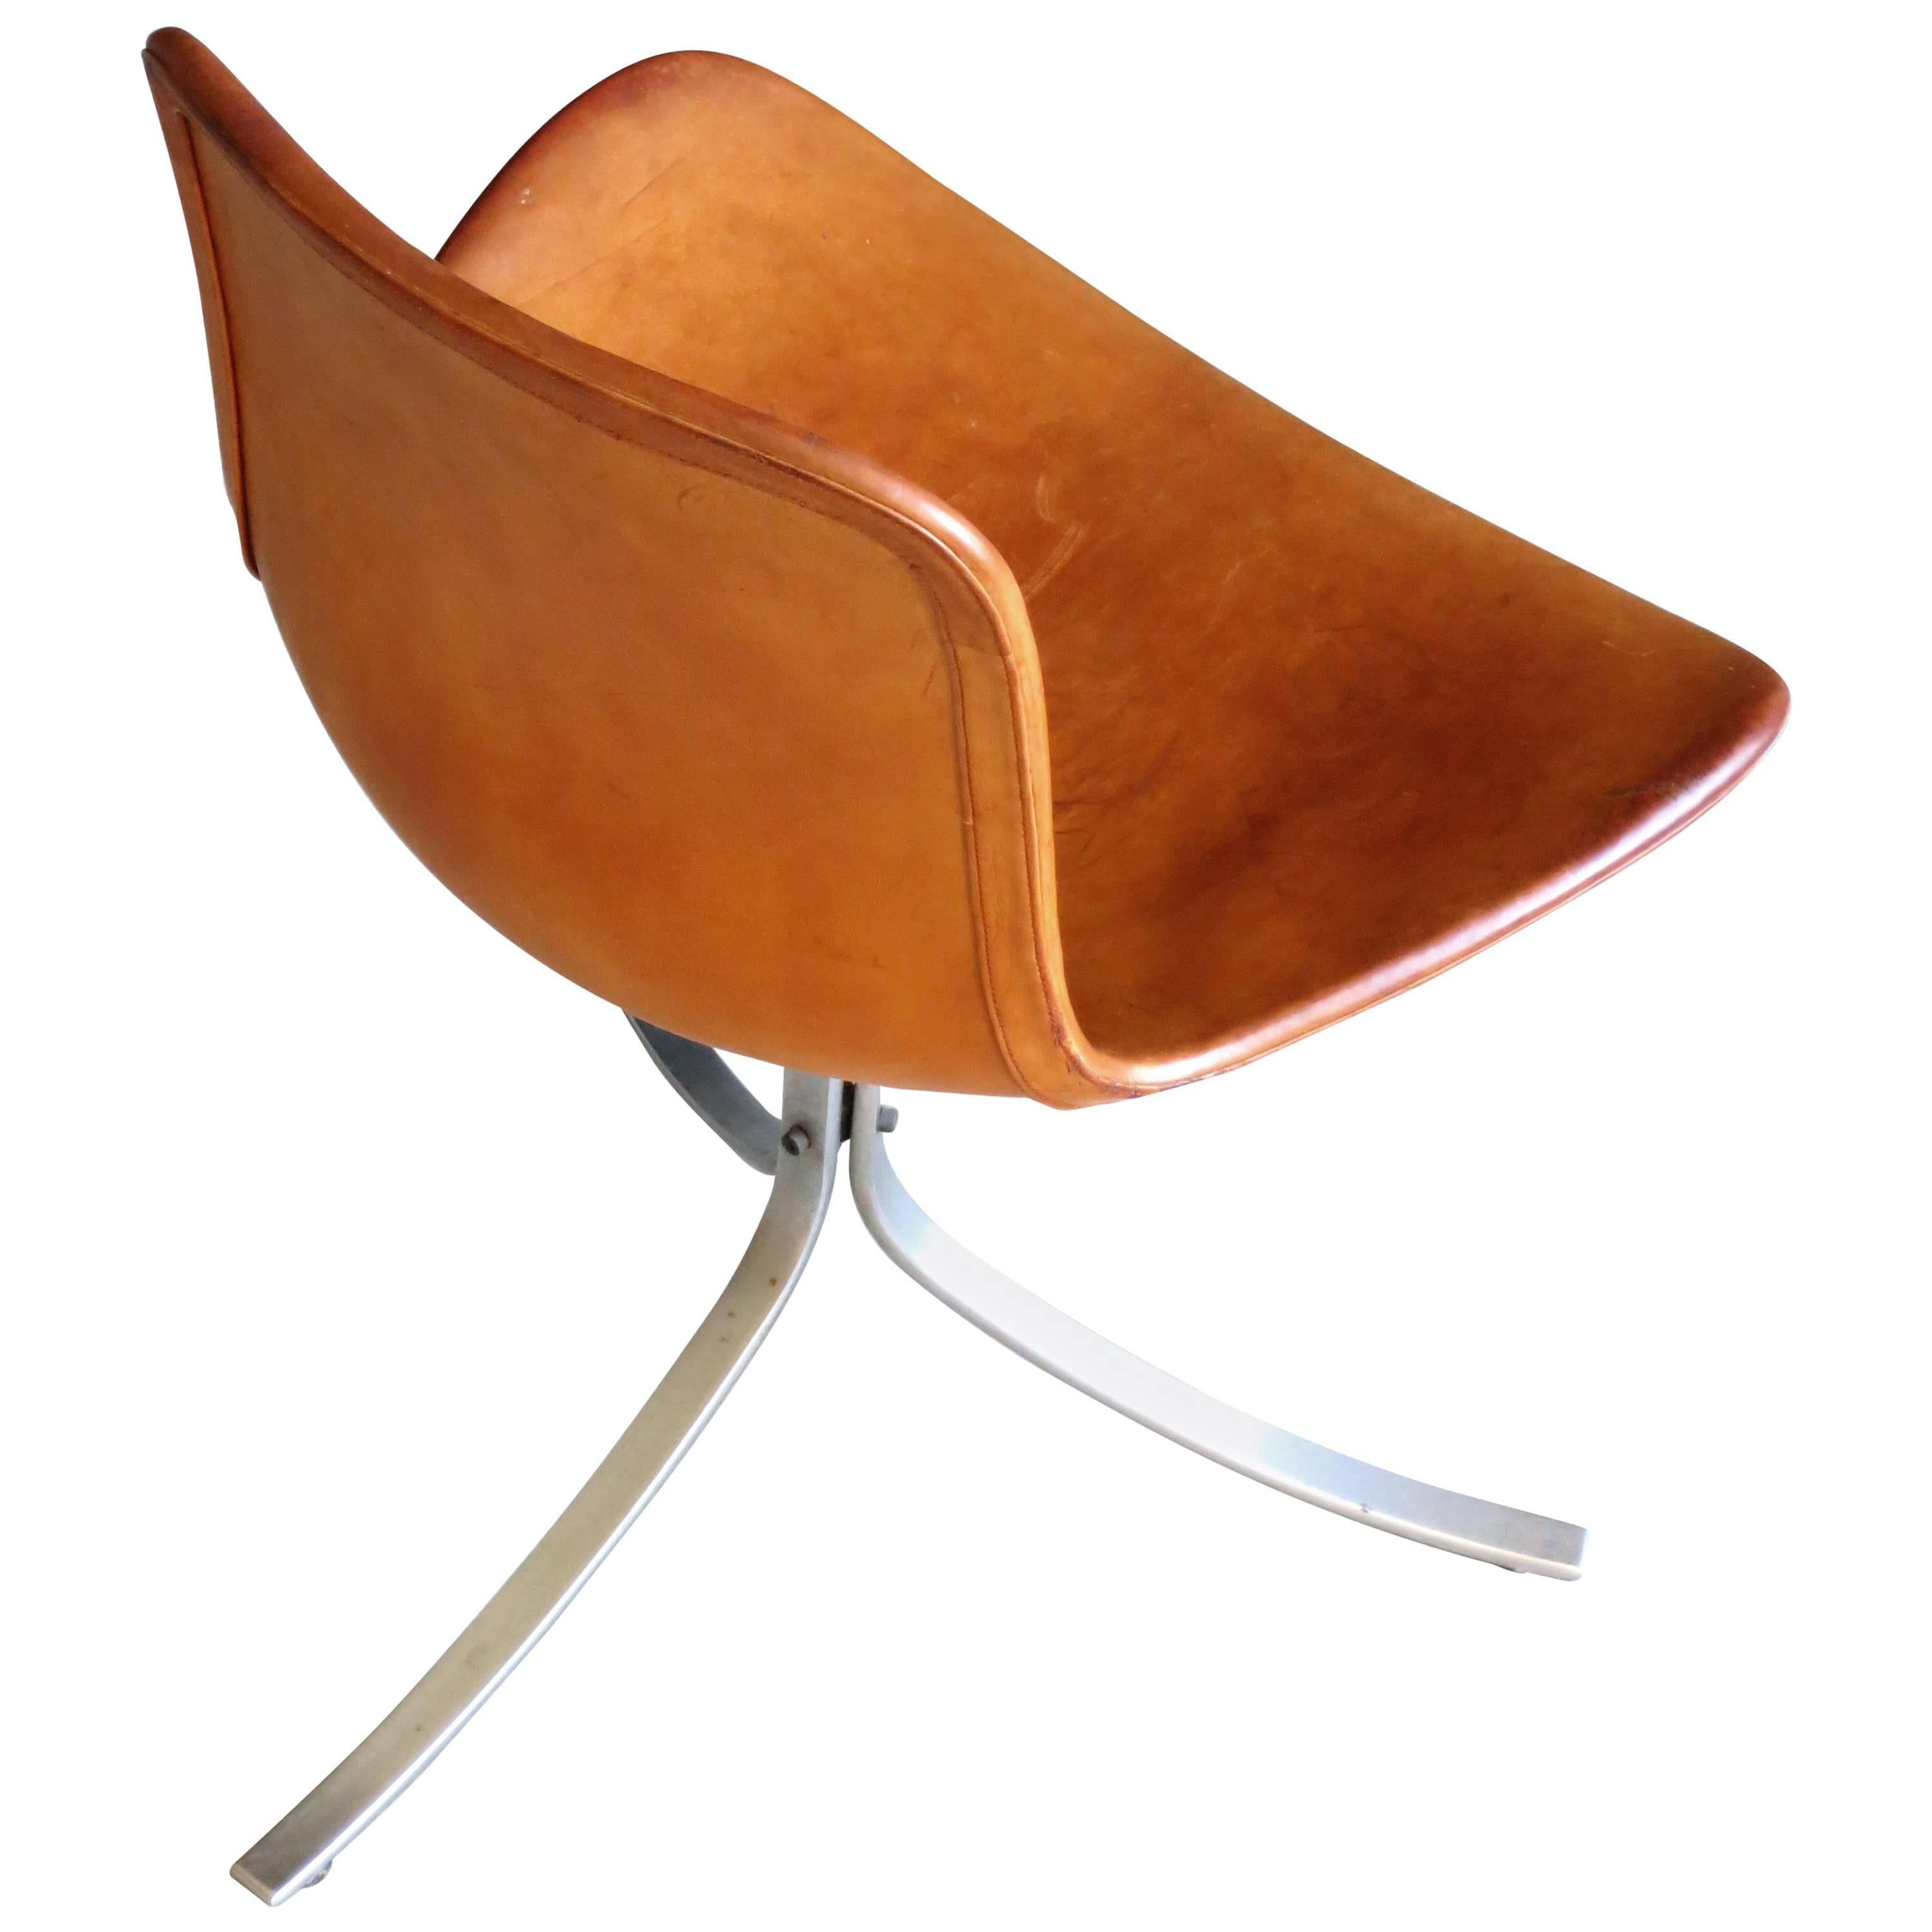 PK 9 Chair in Patinated Natural Saddle Leather by Poul Kjærholm For Sale